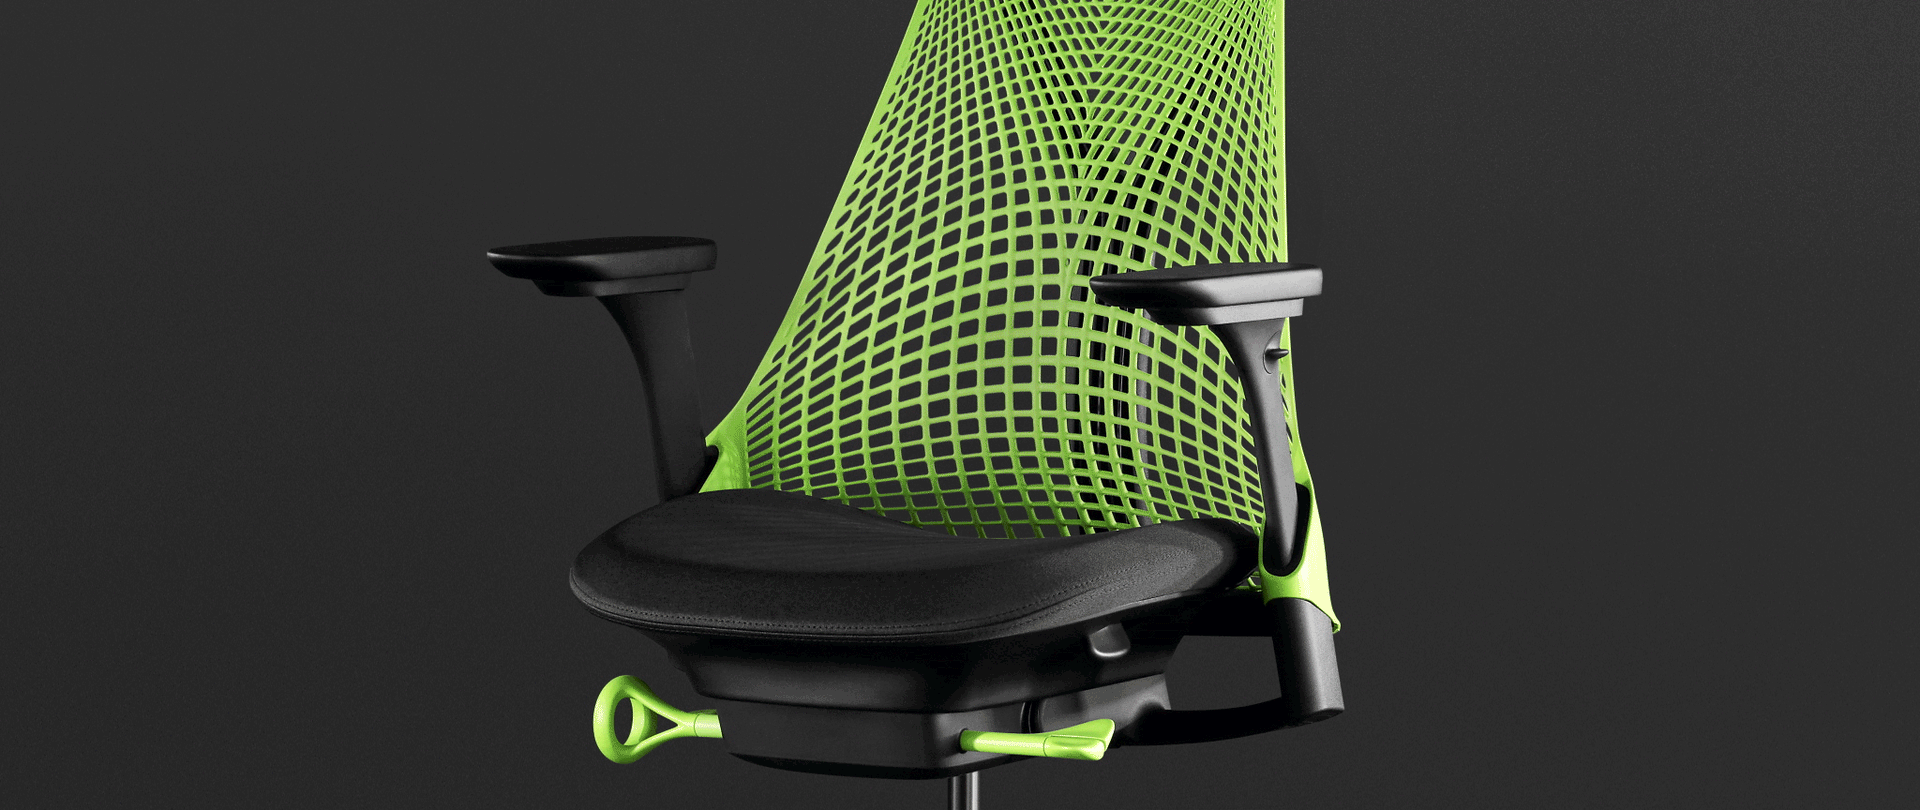 An animation over a photograph of the Sayl Chair in Neon highlights the benefits of its Harmonic Tilt.